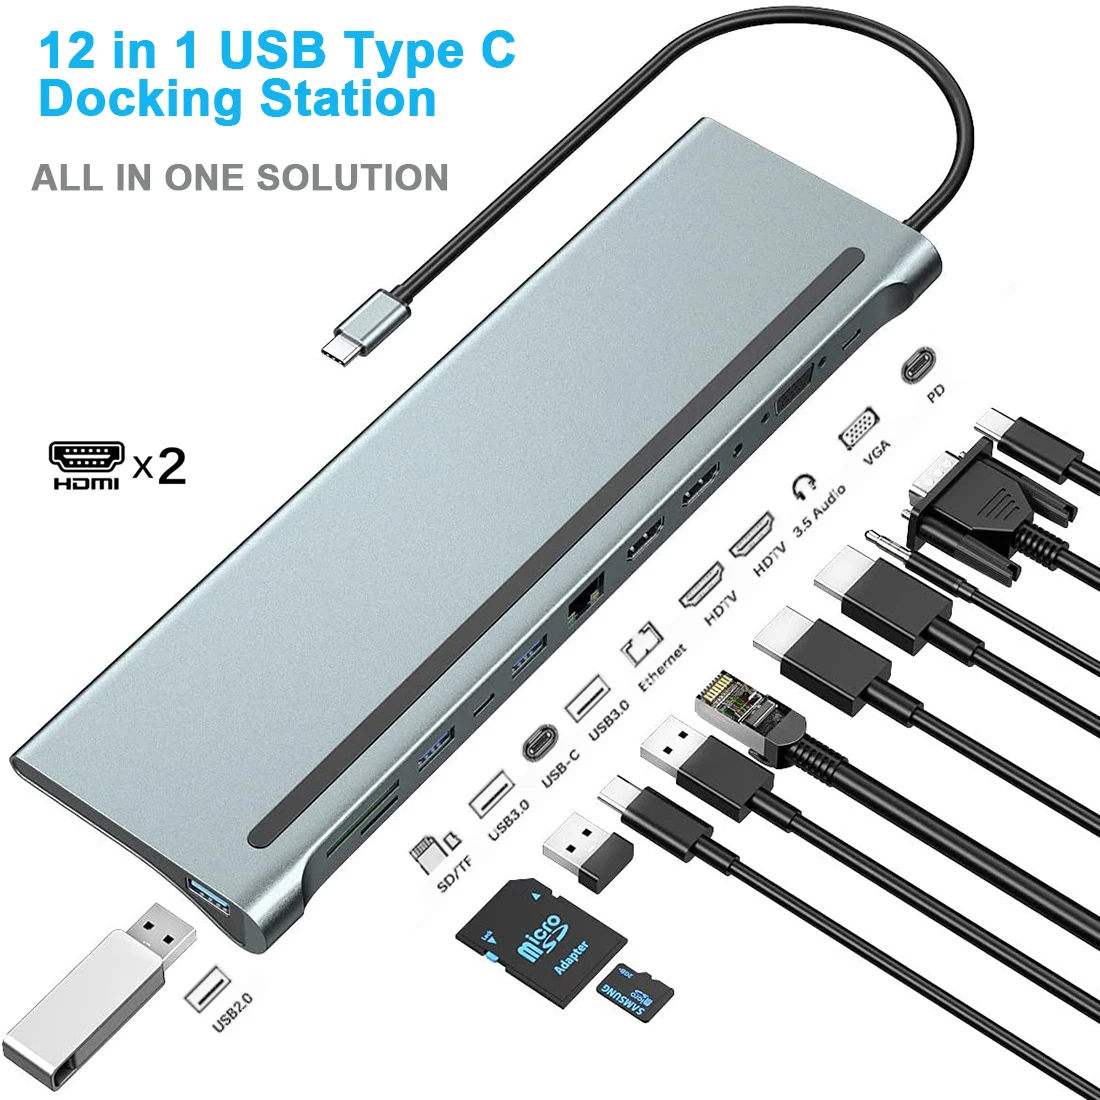 

12 in 1 USB Type C Hub Adapter Laptop Docking Station,MST Dual Monitor Dual HDMI VGA RJ45 SD TF PD for MacBook Dell Hp ThinkPad